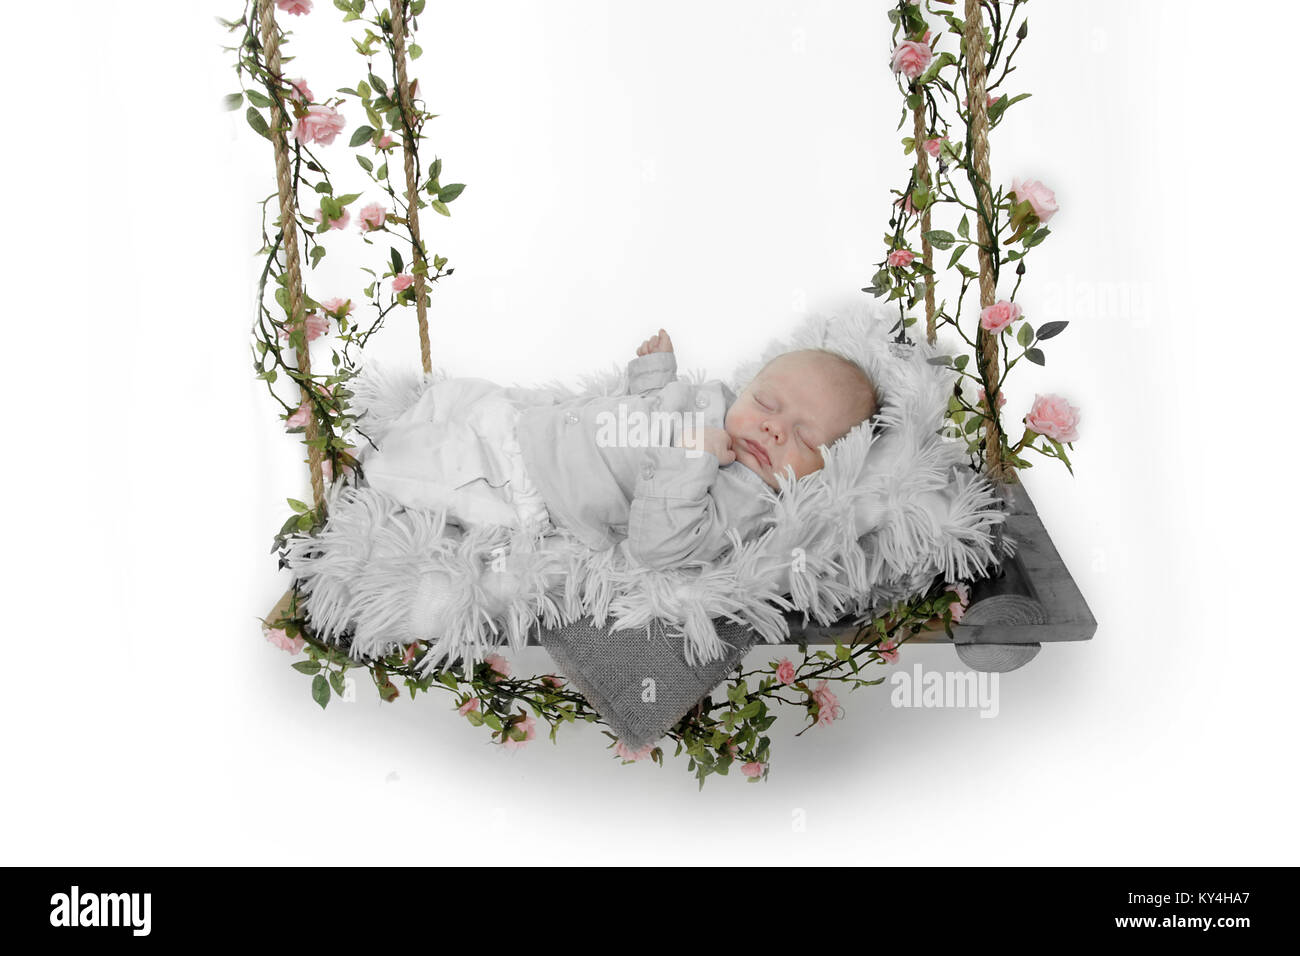 Sleeping baby boy 1 mois Banque D'Images